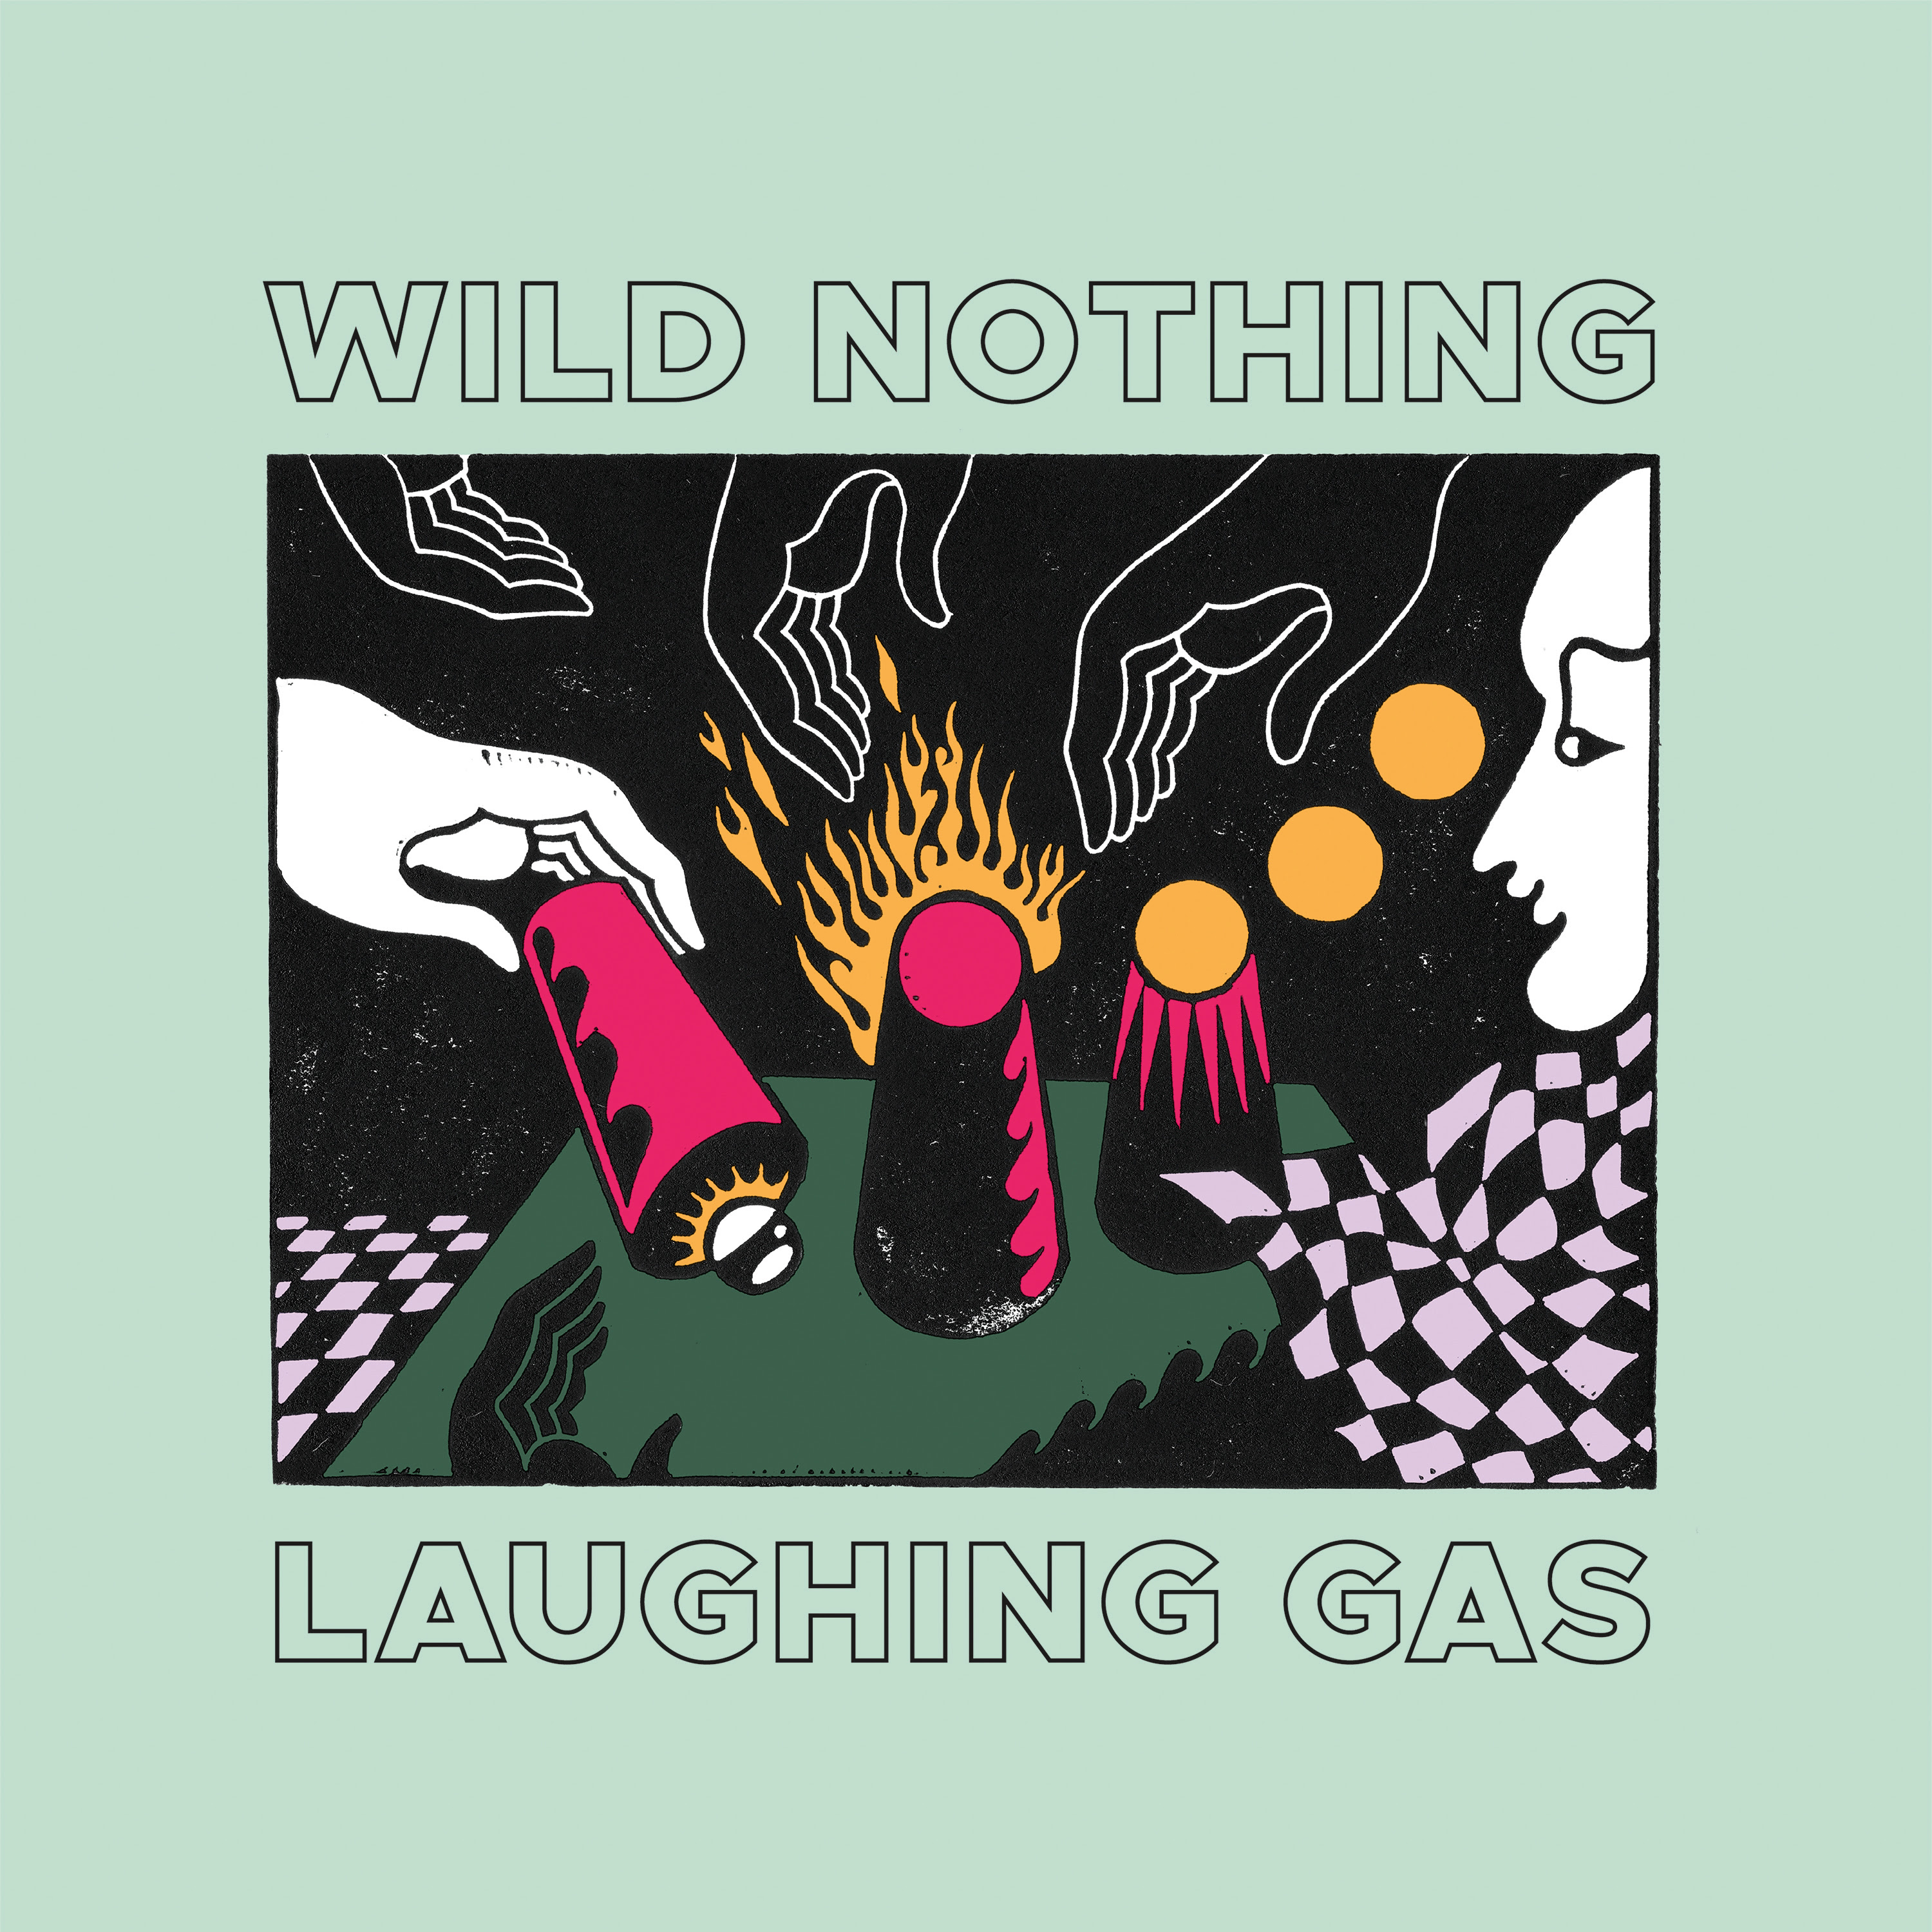 Wild Nothing announces Laughing Gas EP